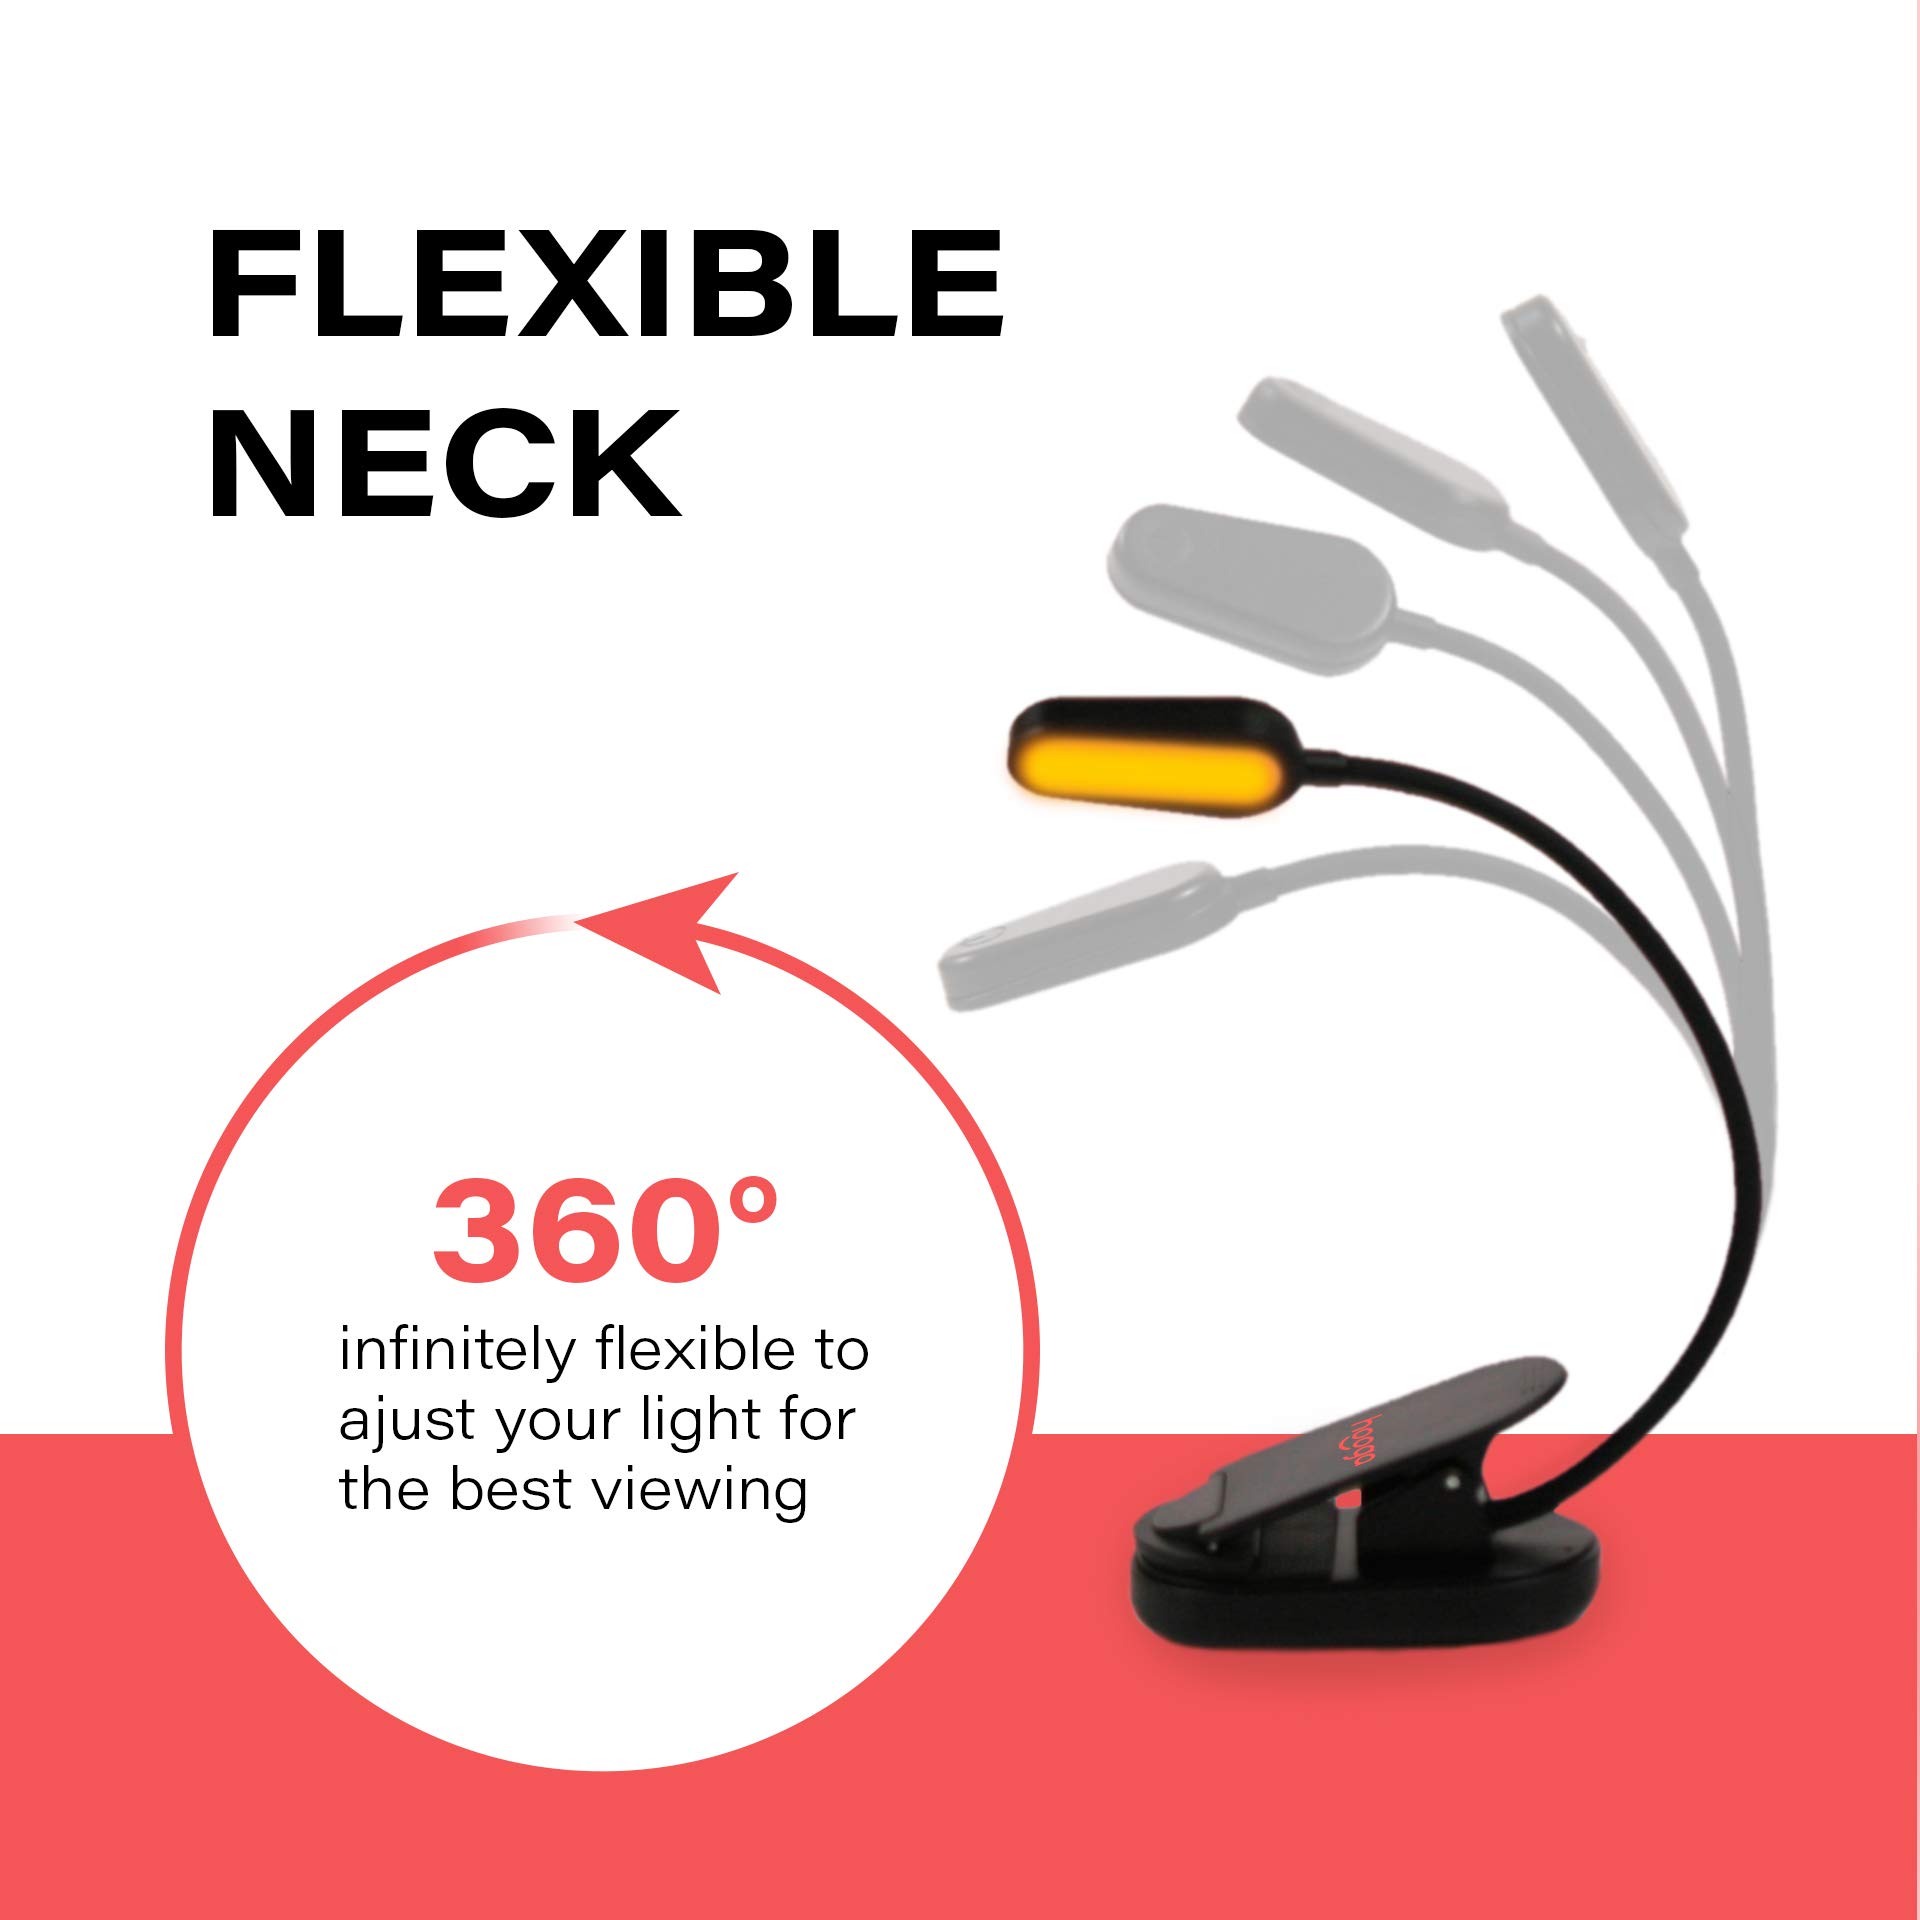 hooga Book Light, Rechargeable Clip On Blue Blocking Amber LED Light for Reading in Bed. 1600K Color. Eye Care Light for Strain-Free, Healthy Eyes. Gift for Students, Kids, Travel, Nursing, Studying.